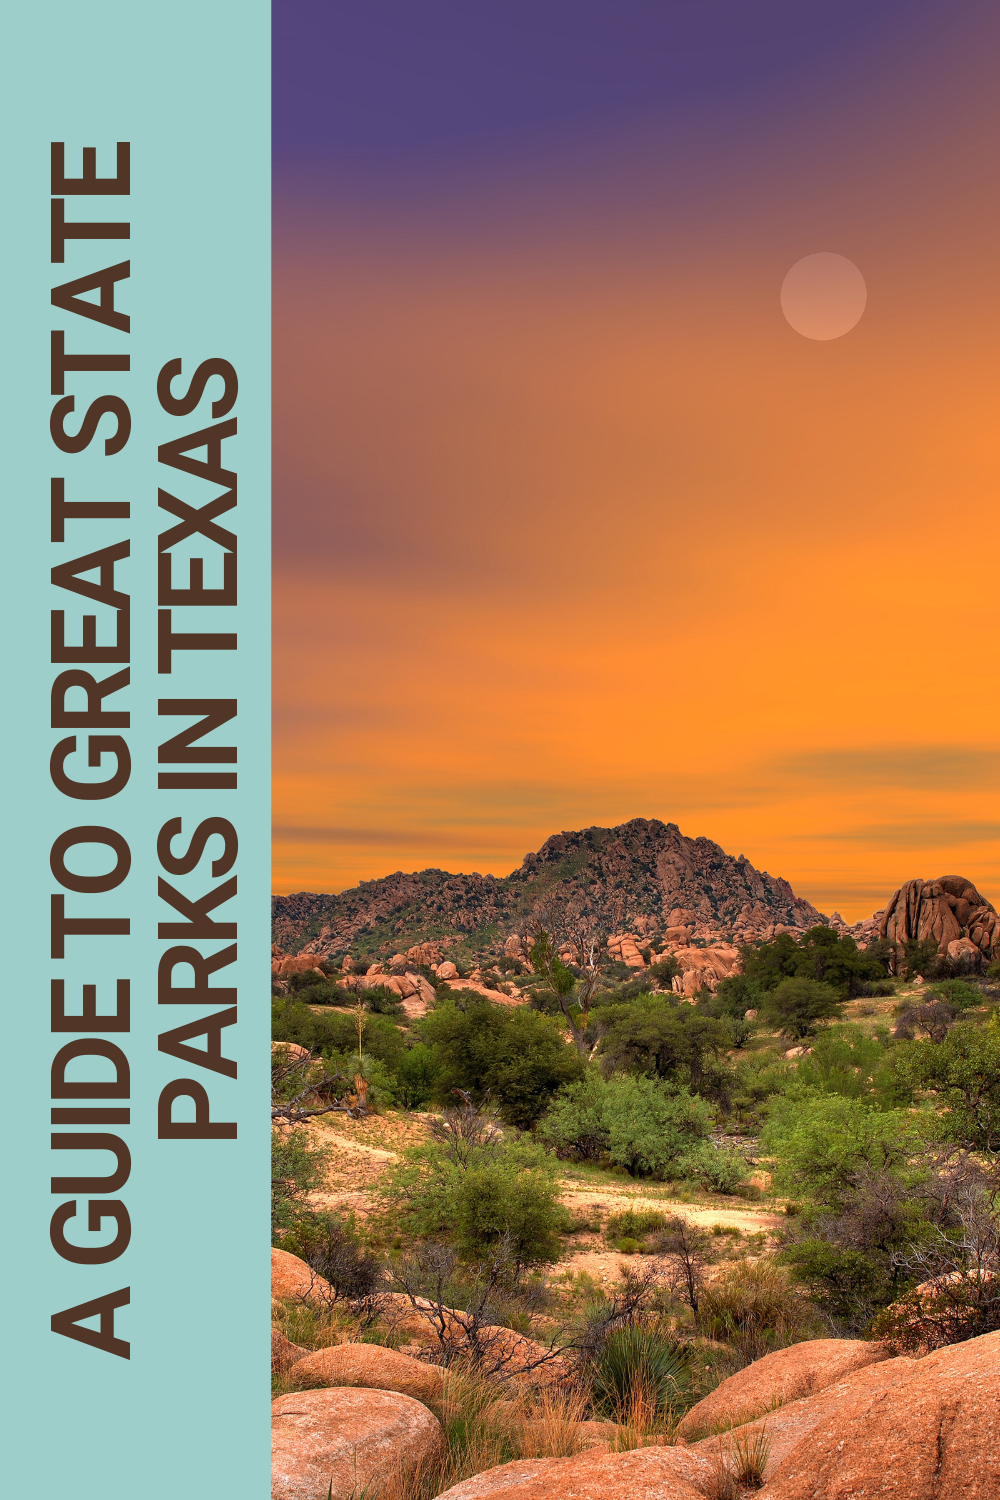 State Parks in Texas | Great State Parks in Texas | State Parks Texas